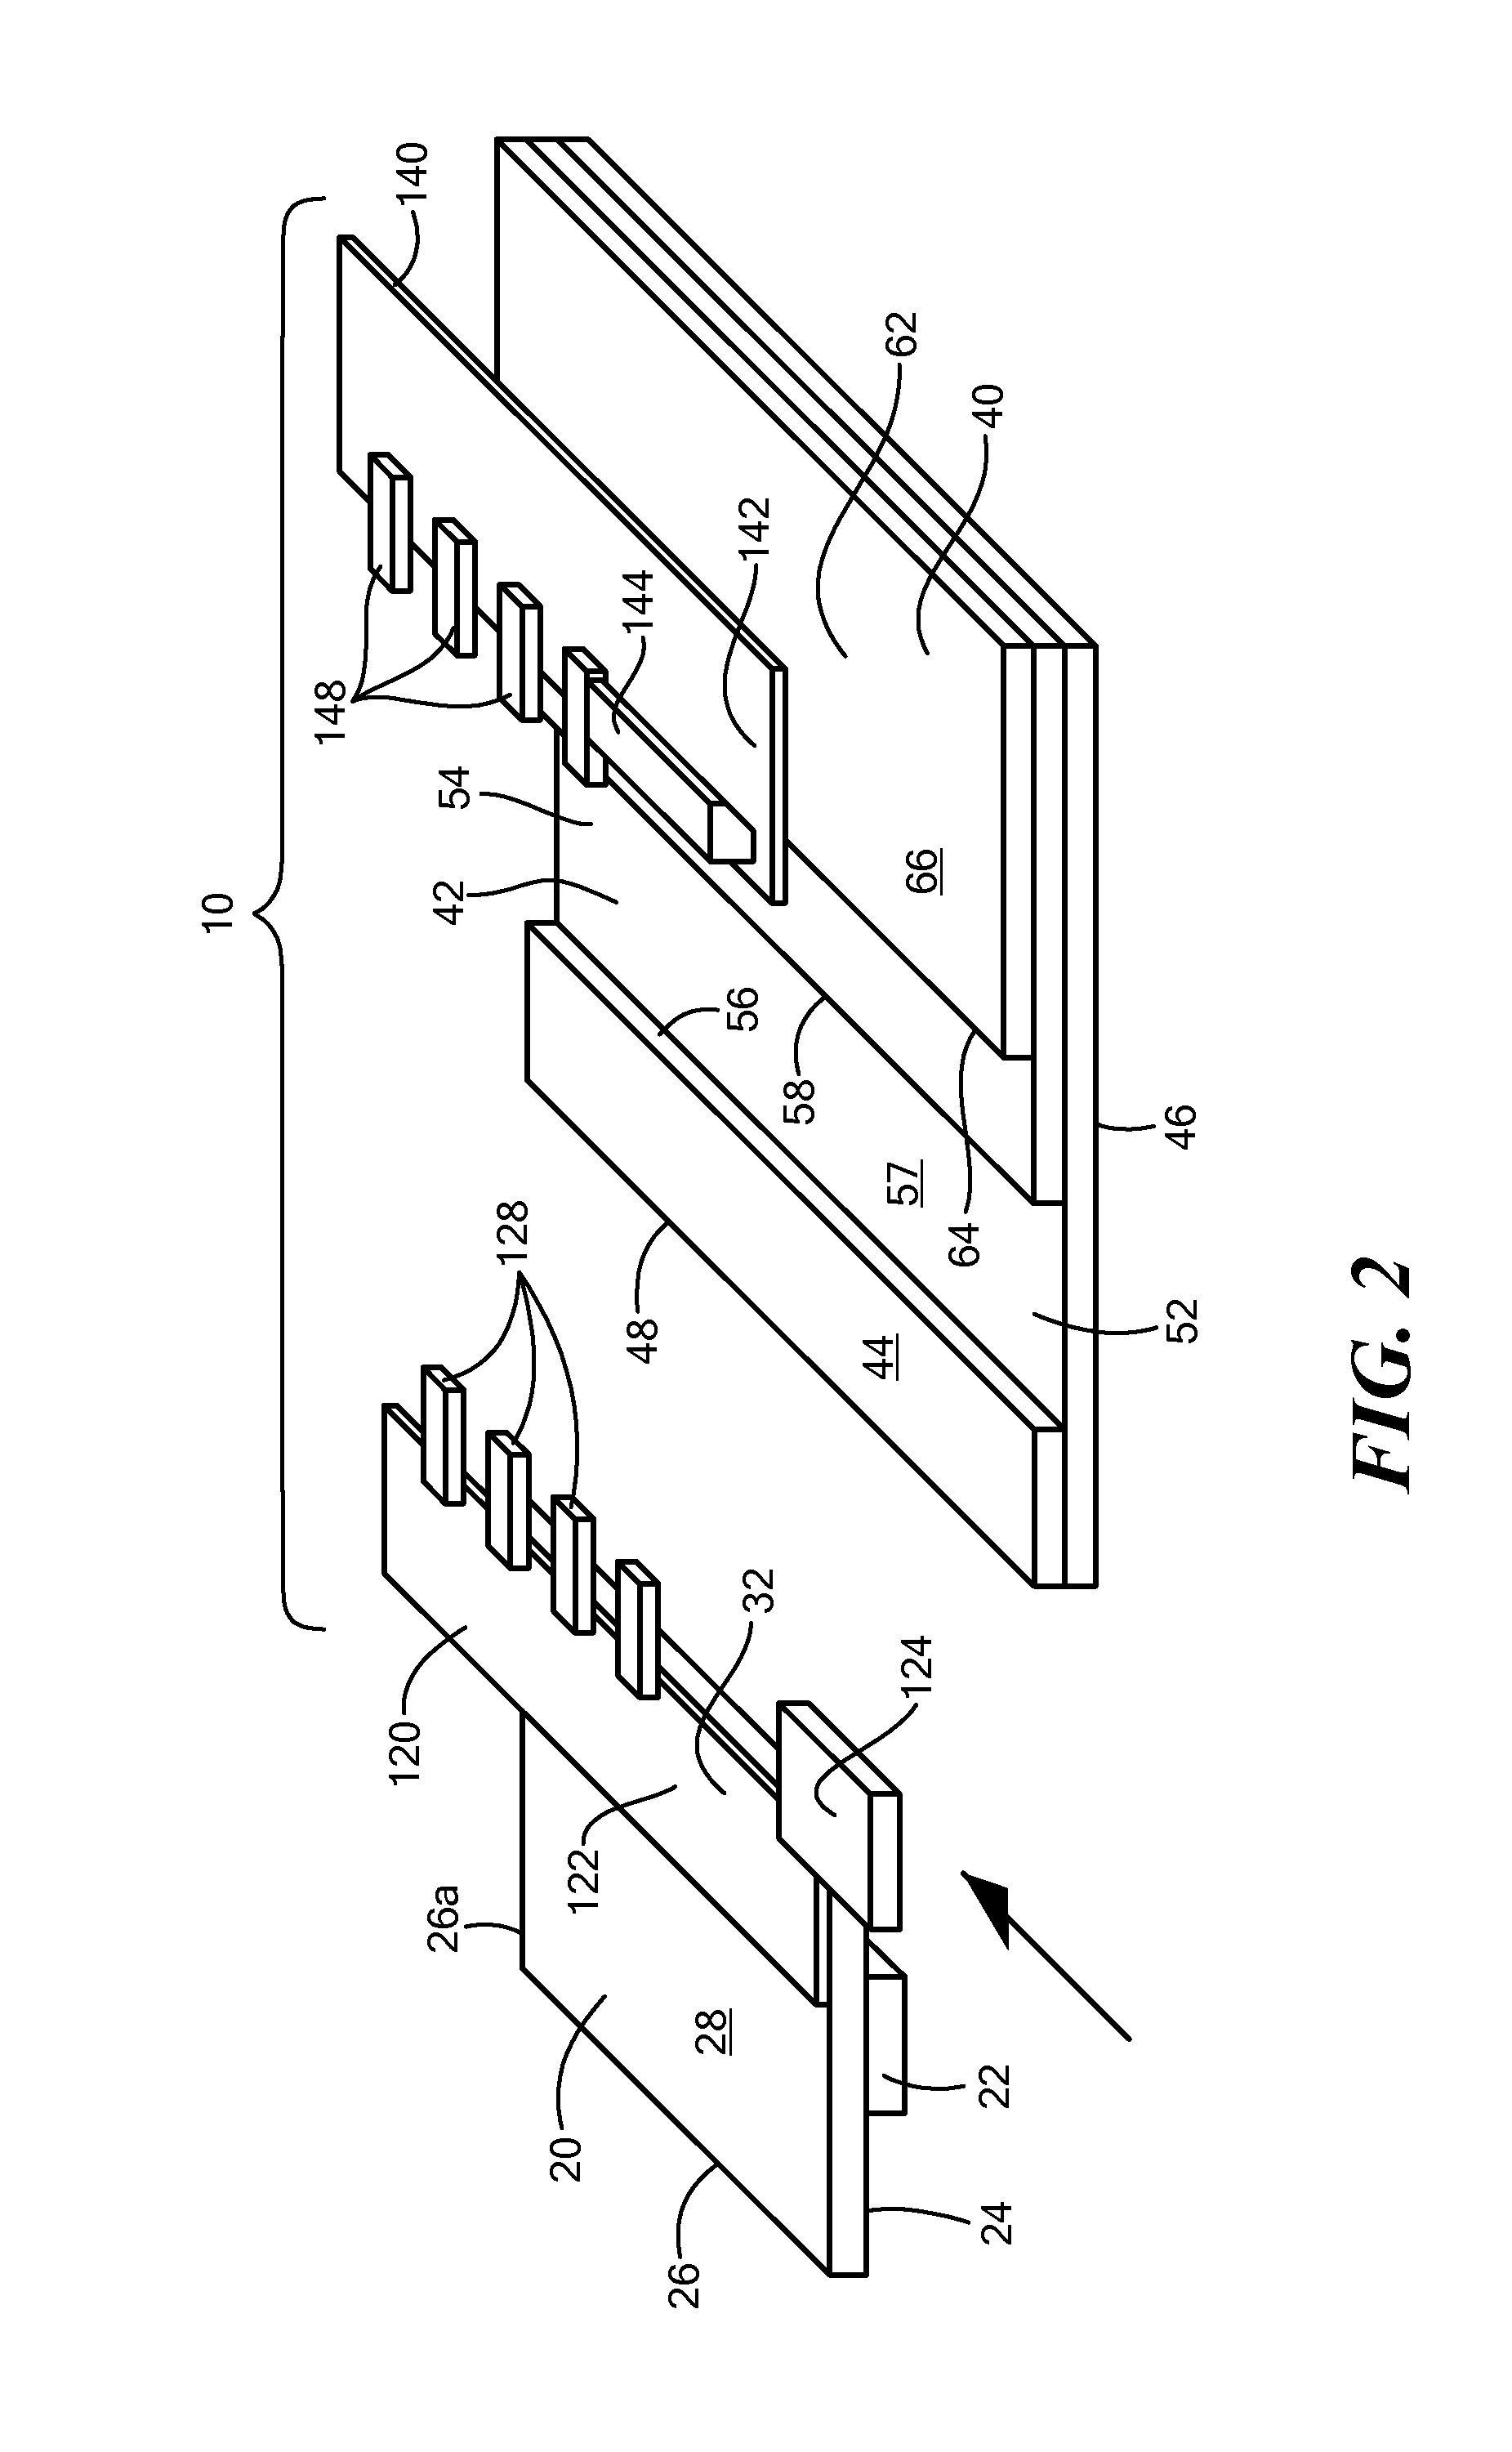 Zipper Guide for Facilitating Closure of Open-Ended Zipper